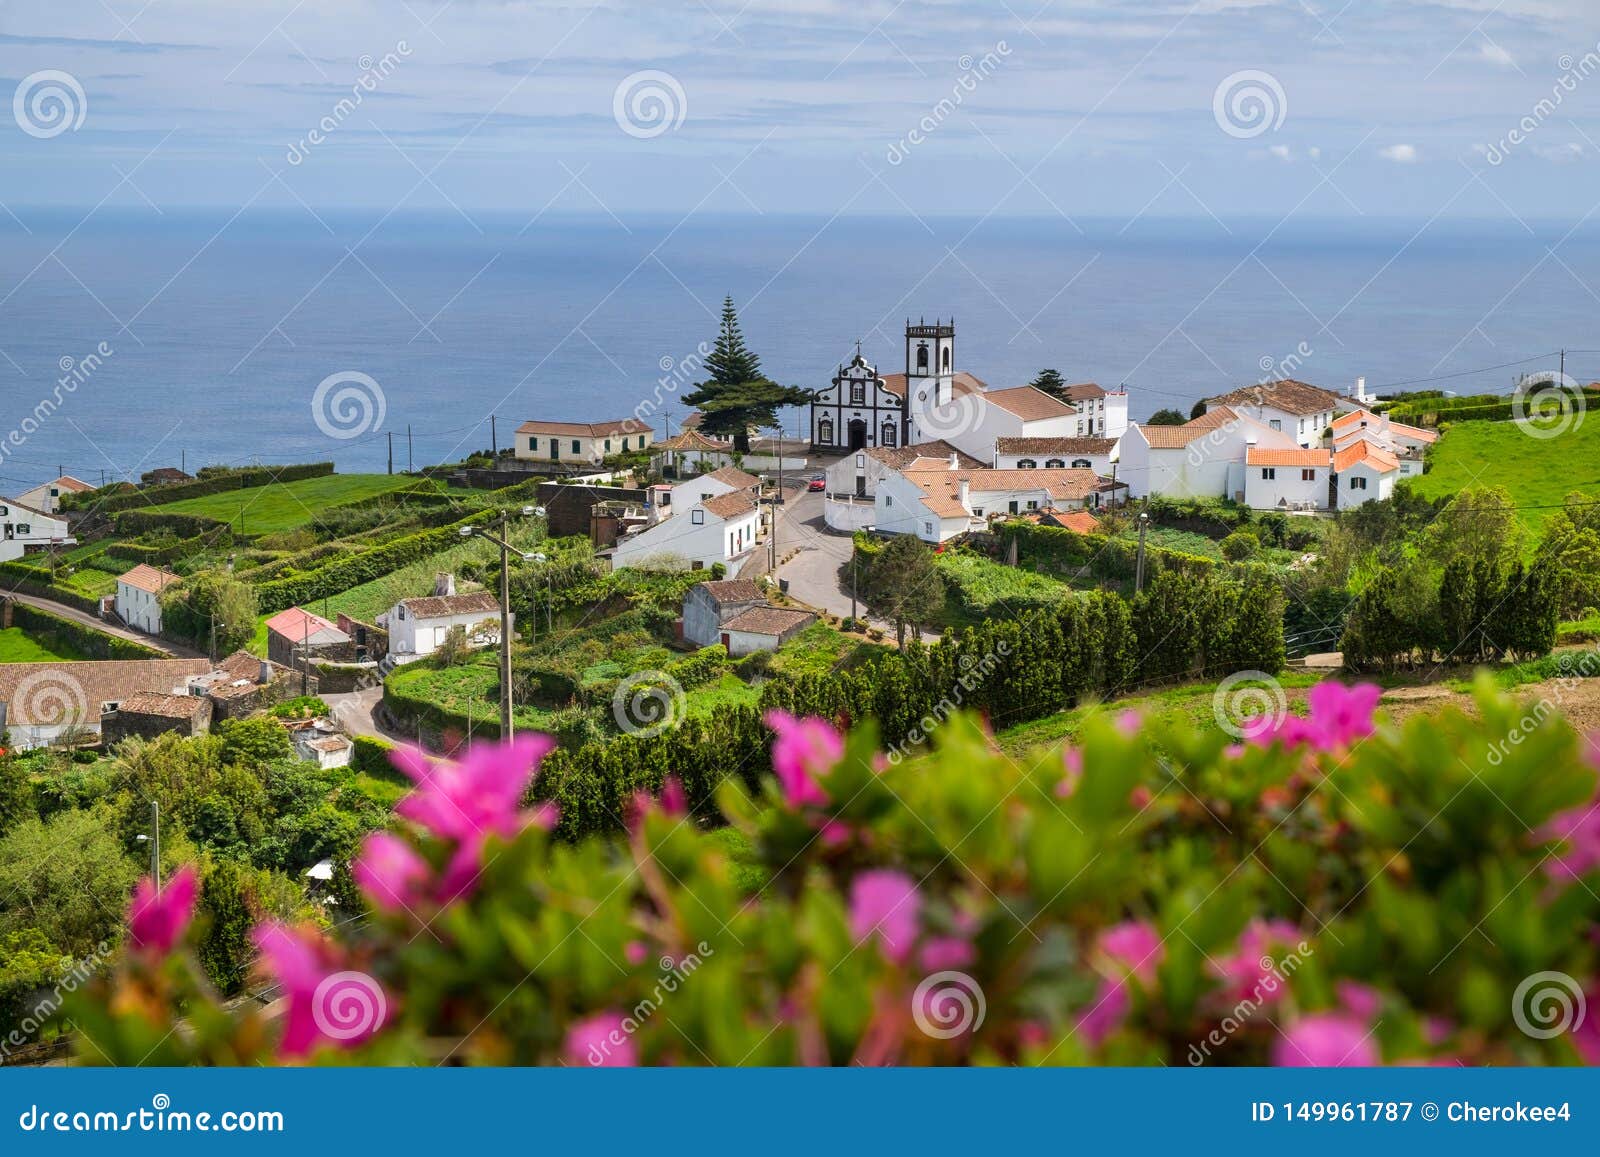 beautiful view of the village in nordeste against atlantic ocean, sao miguel island, azores, portugal.